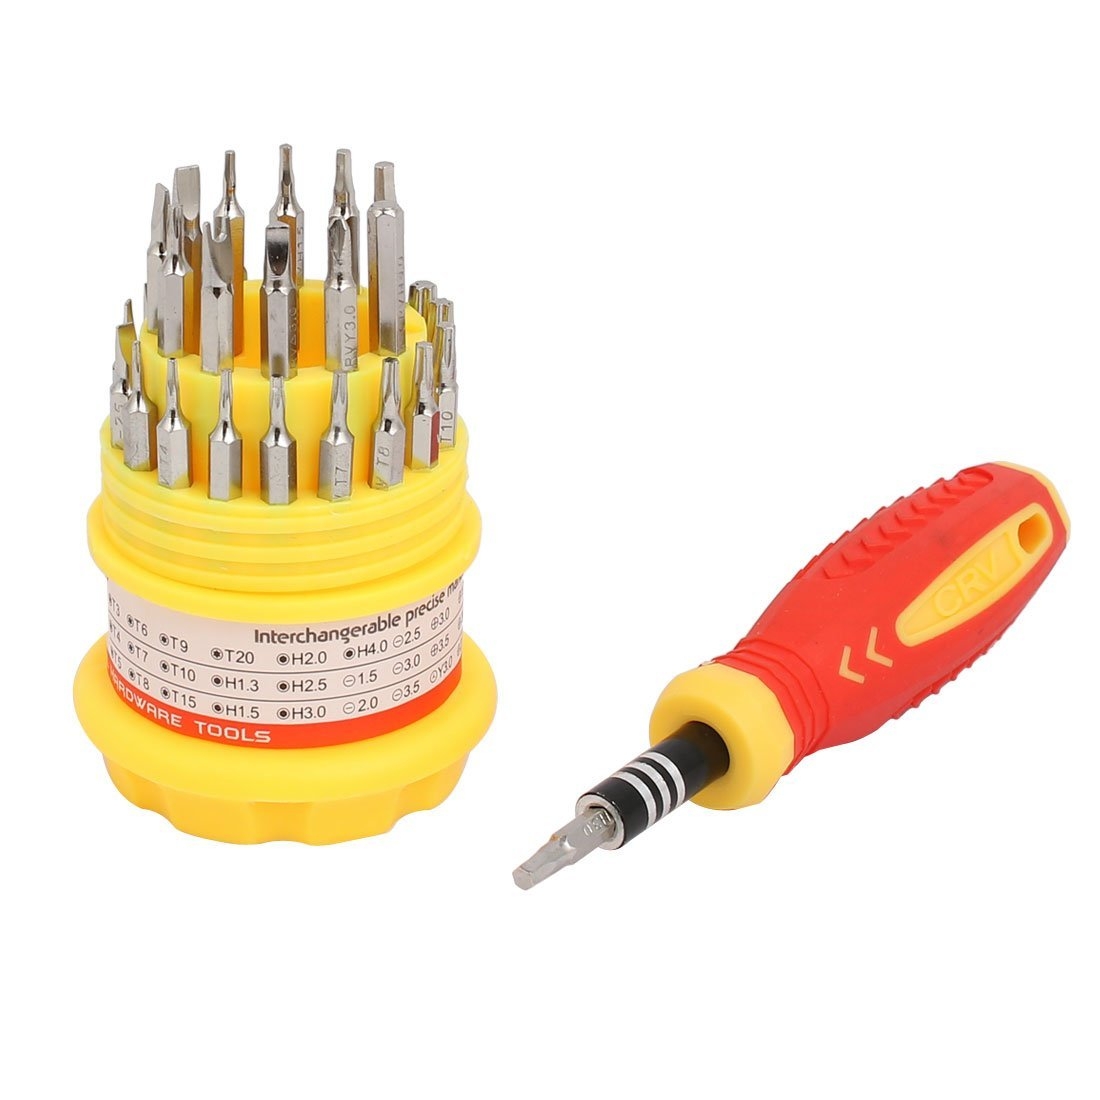 31 in 1 Magnetic Torx Slotted Hex Phillips Precision Screwdriver Set Tools Kit